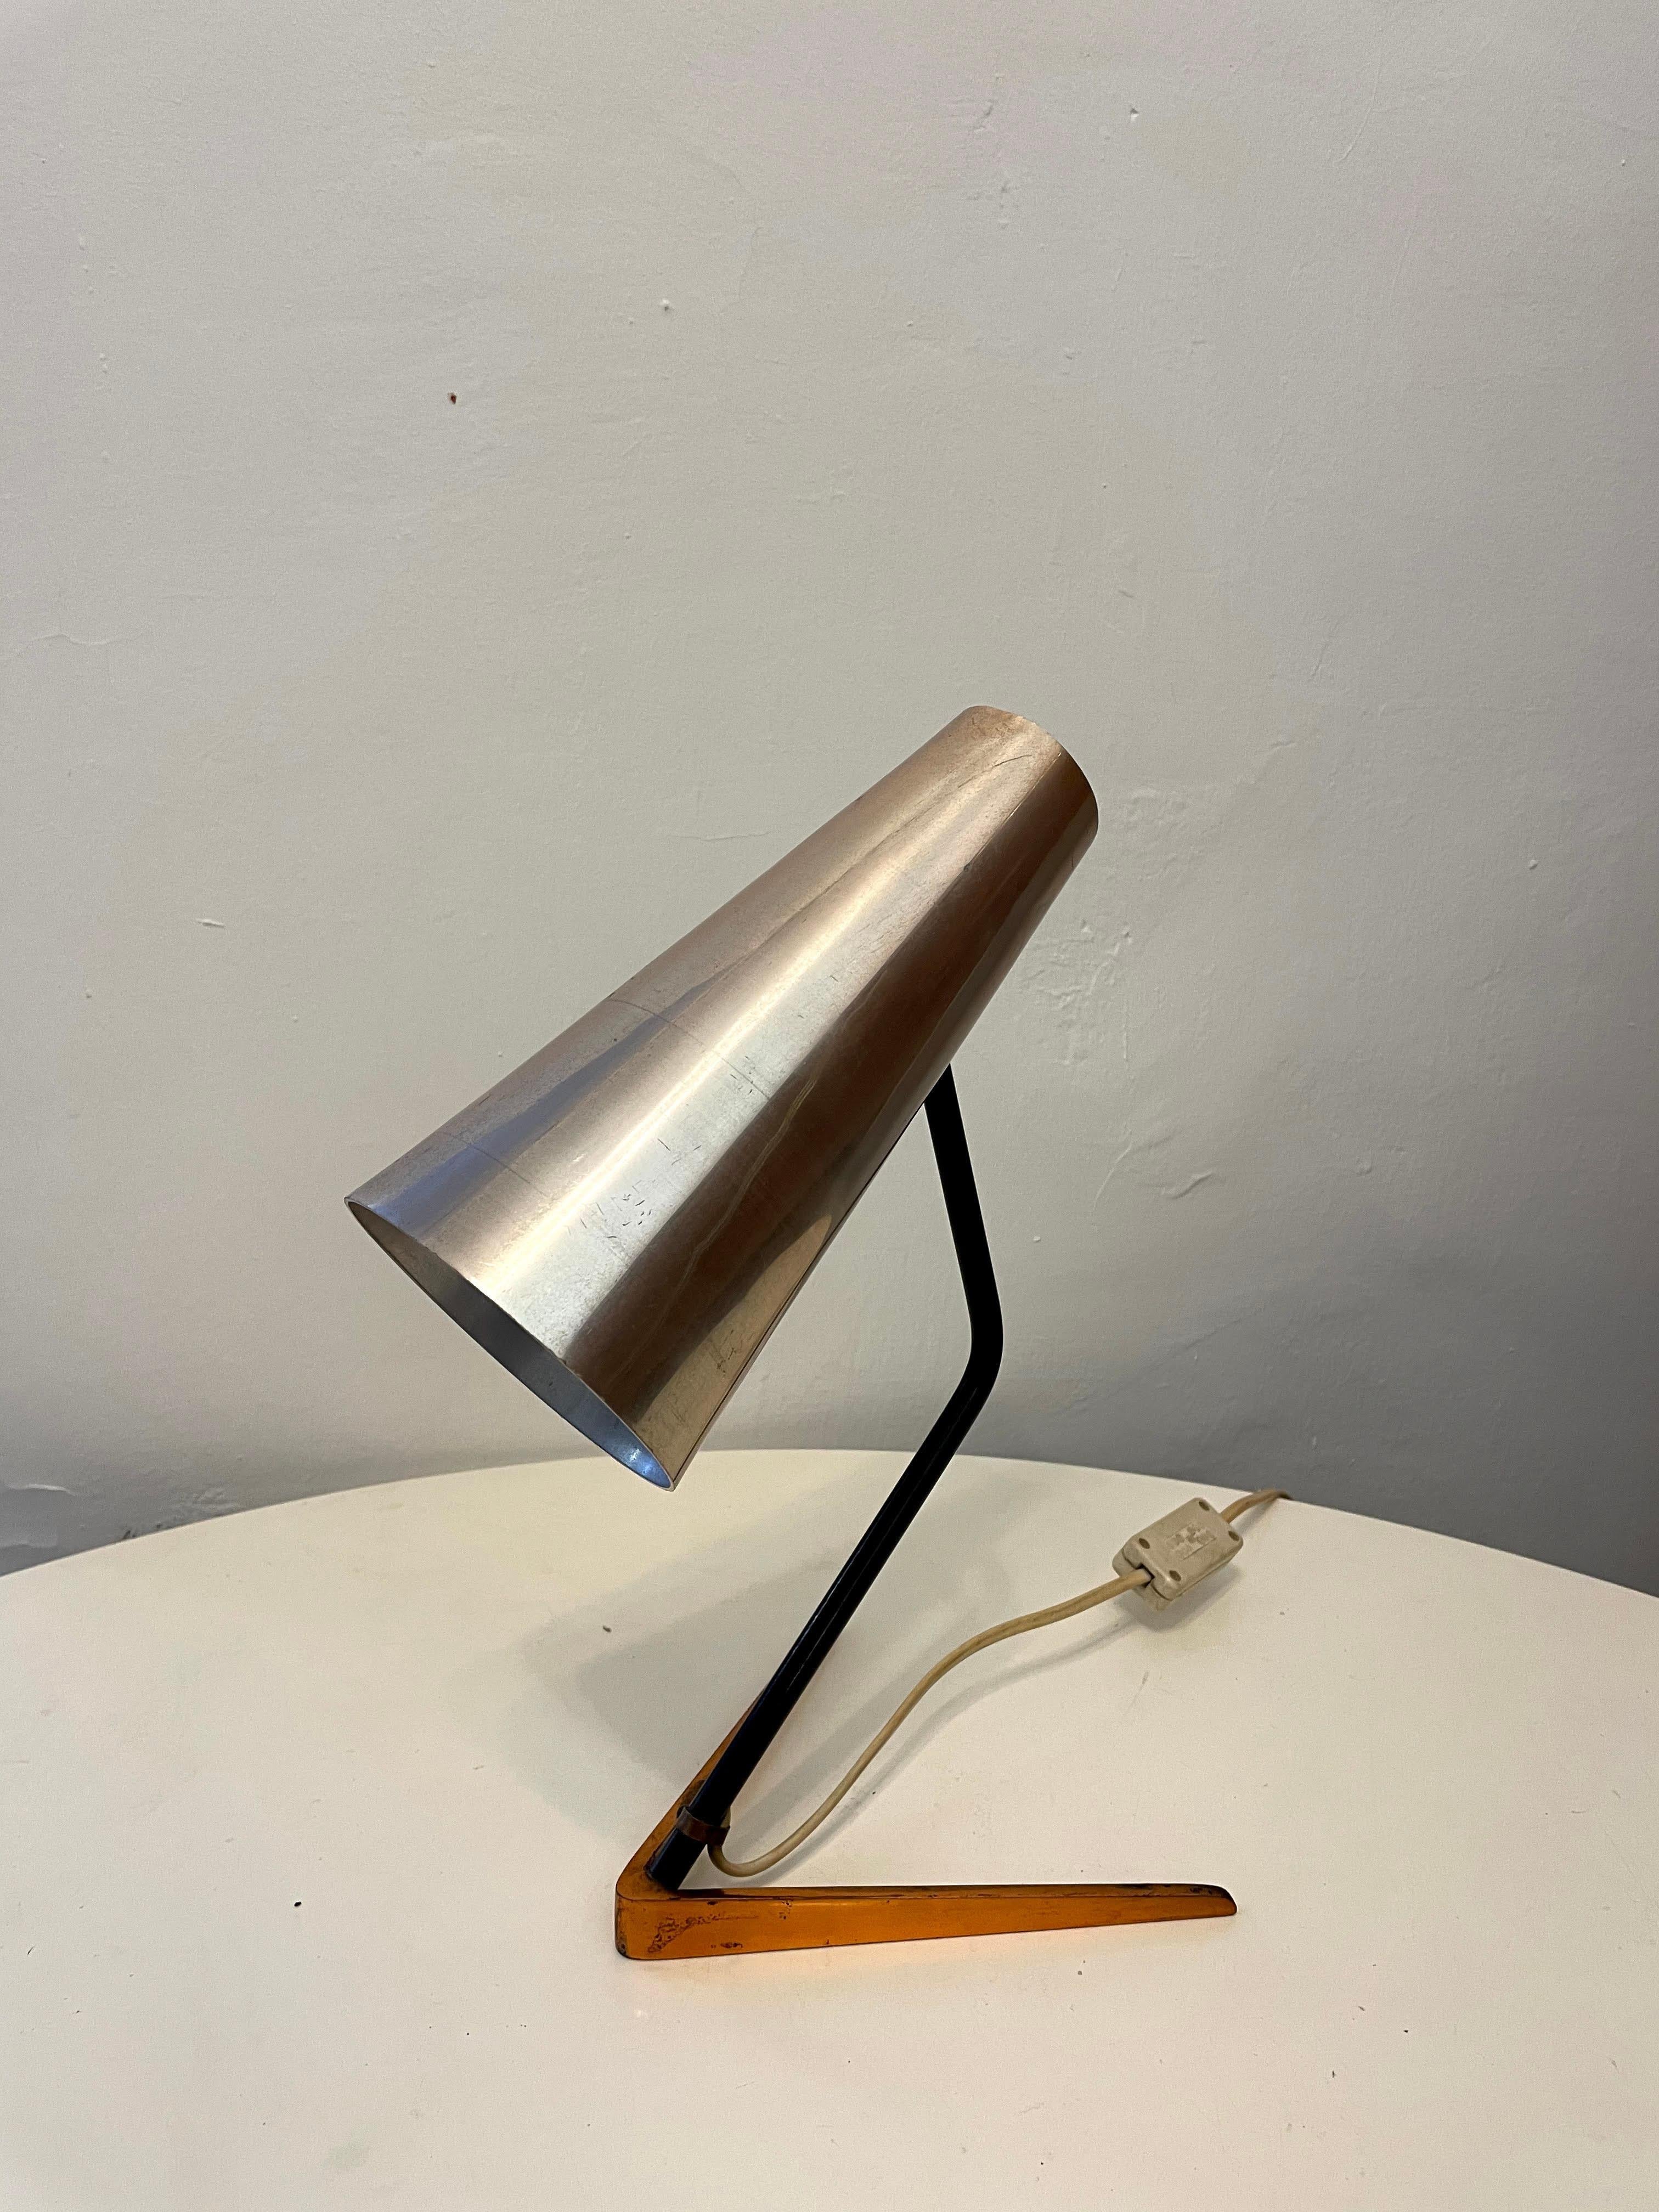 Vintage 1960s Stilux Milano conical table lamp.
This midcentury Italian table lamp is executed in a conical shade mounted on a V-shaped legs in very good vintage condition.
Copper anodized aluminium shade, black enameled steel stem and swivel,